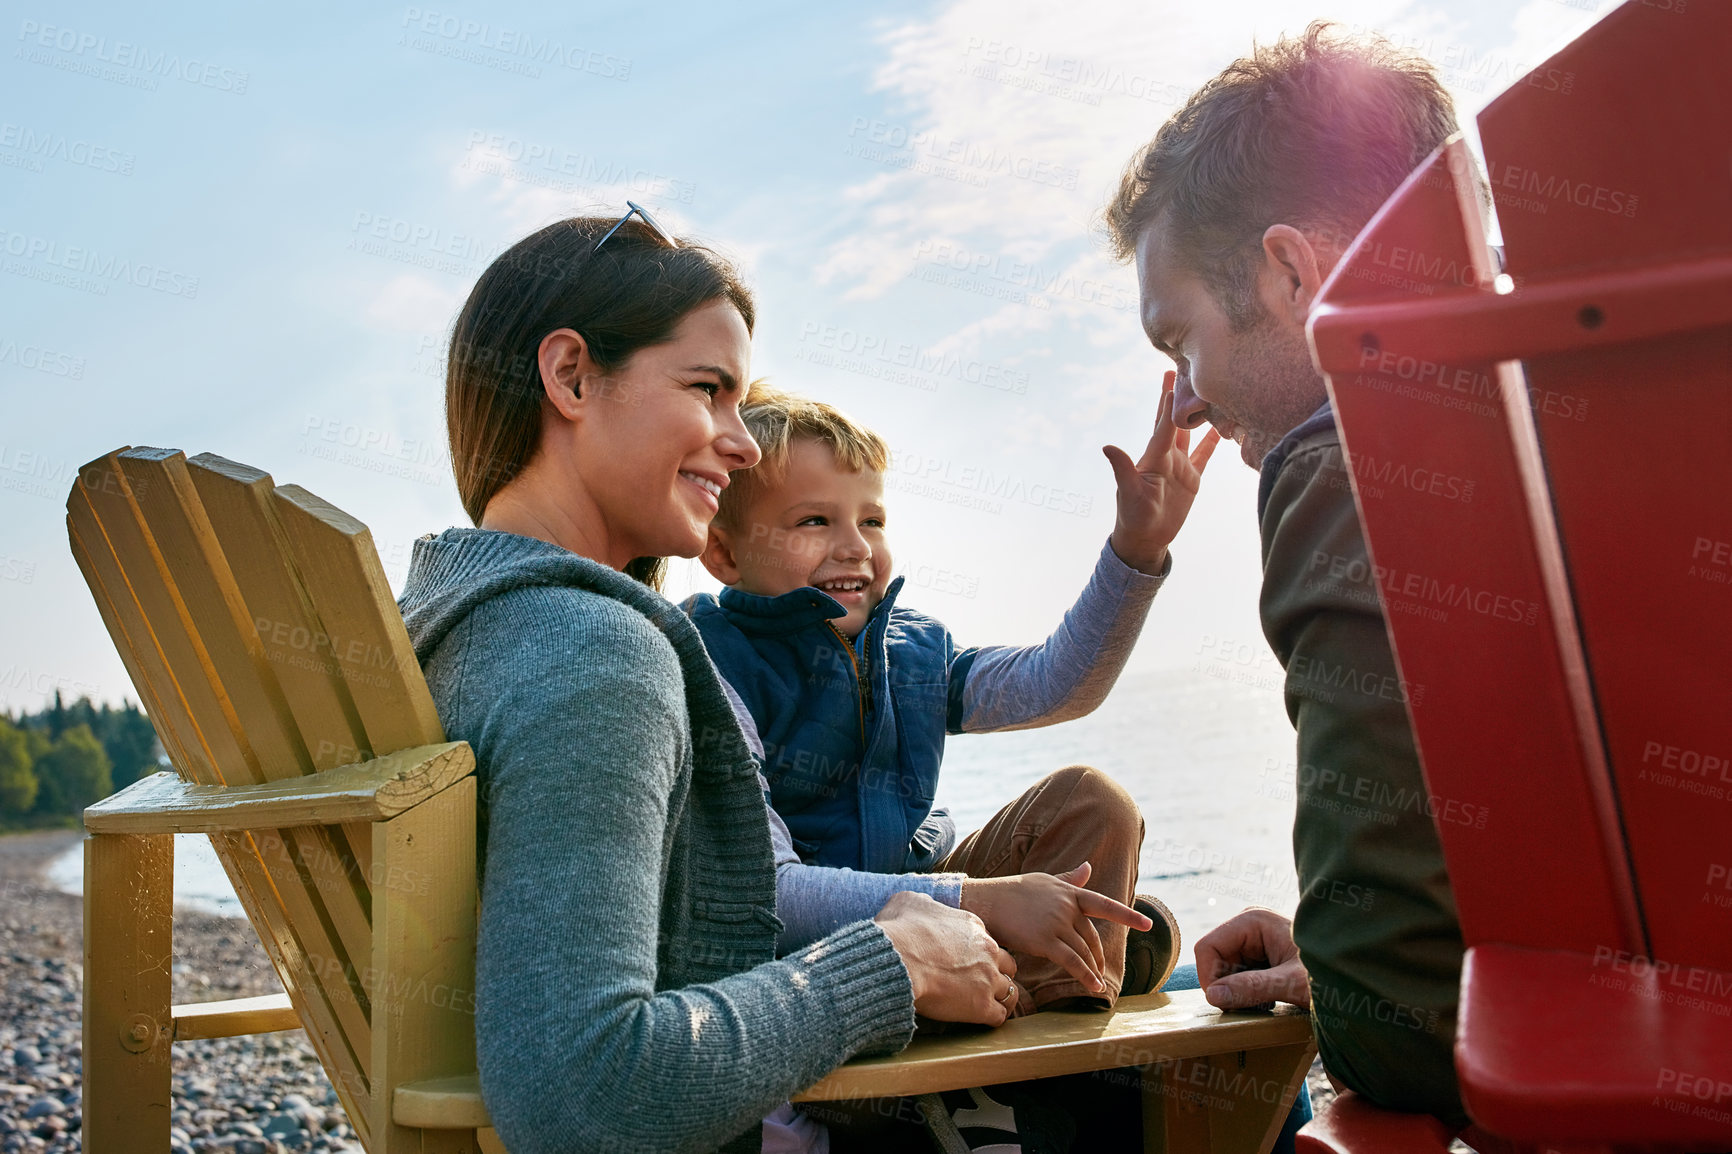 Buy stock photo Shot of a young family spending a day at the lake